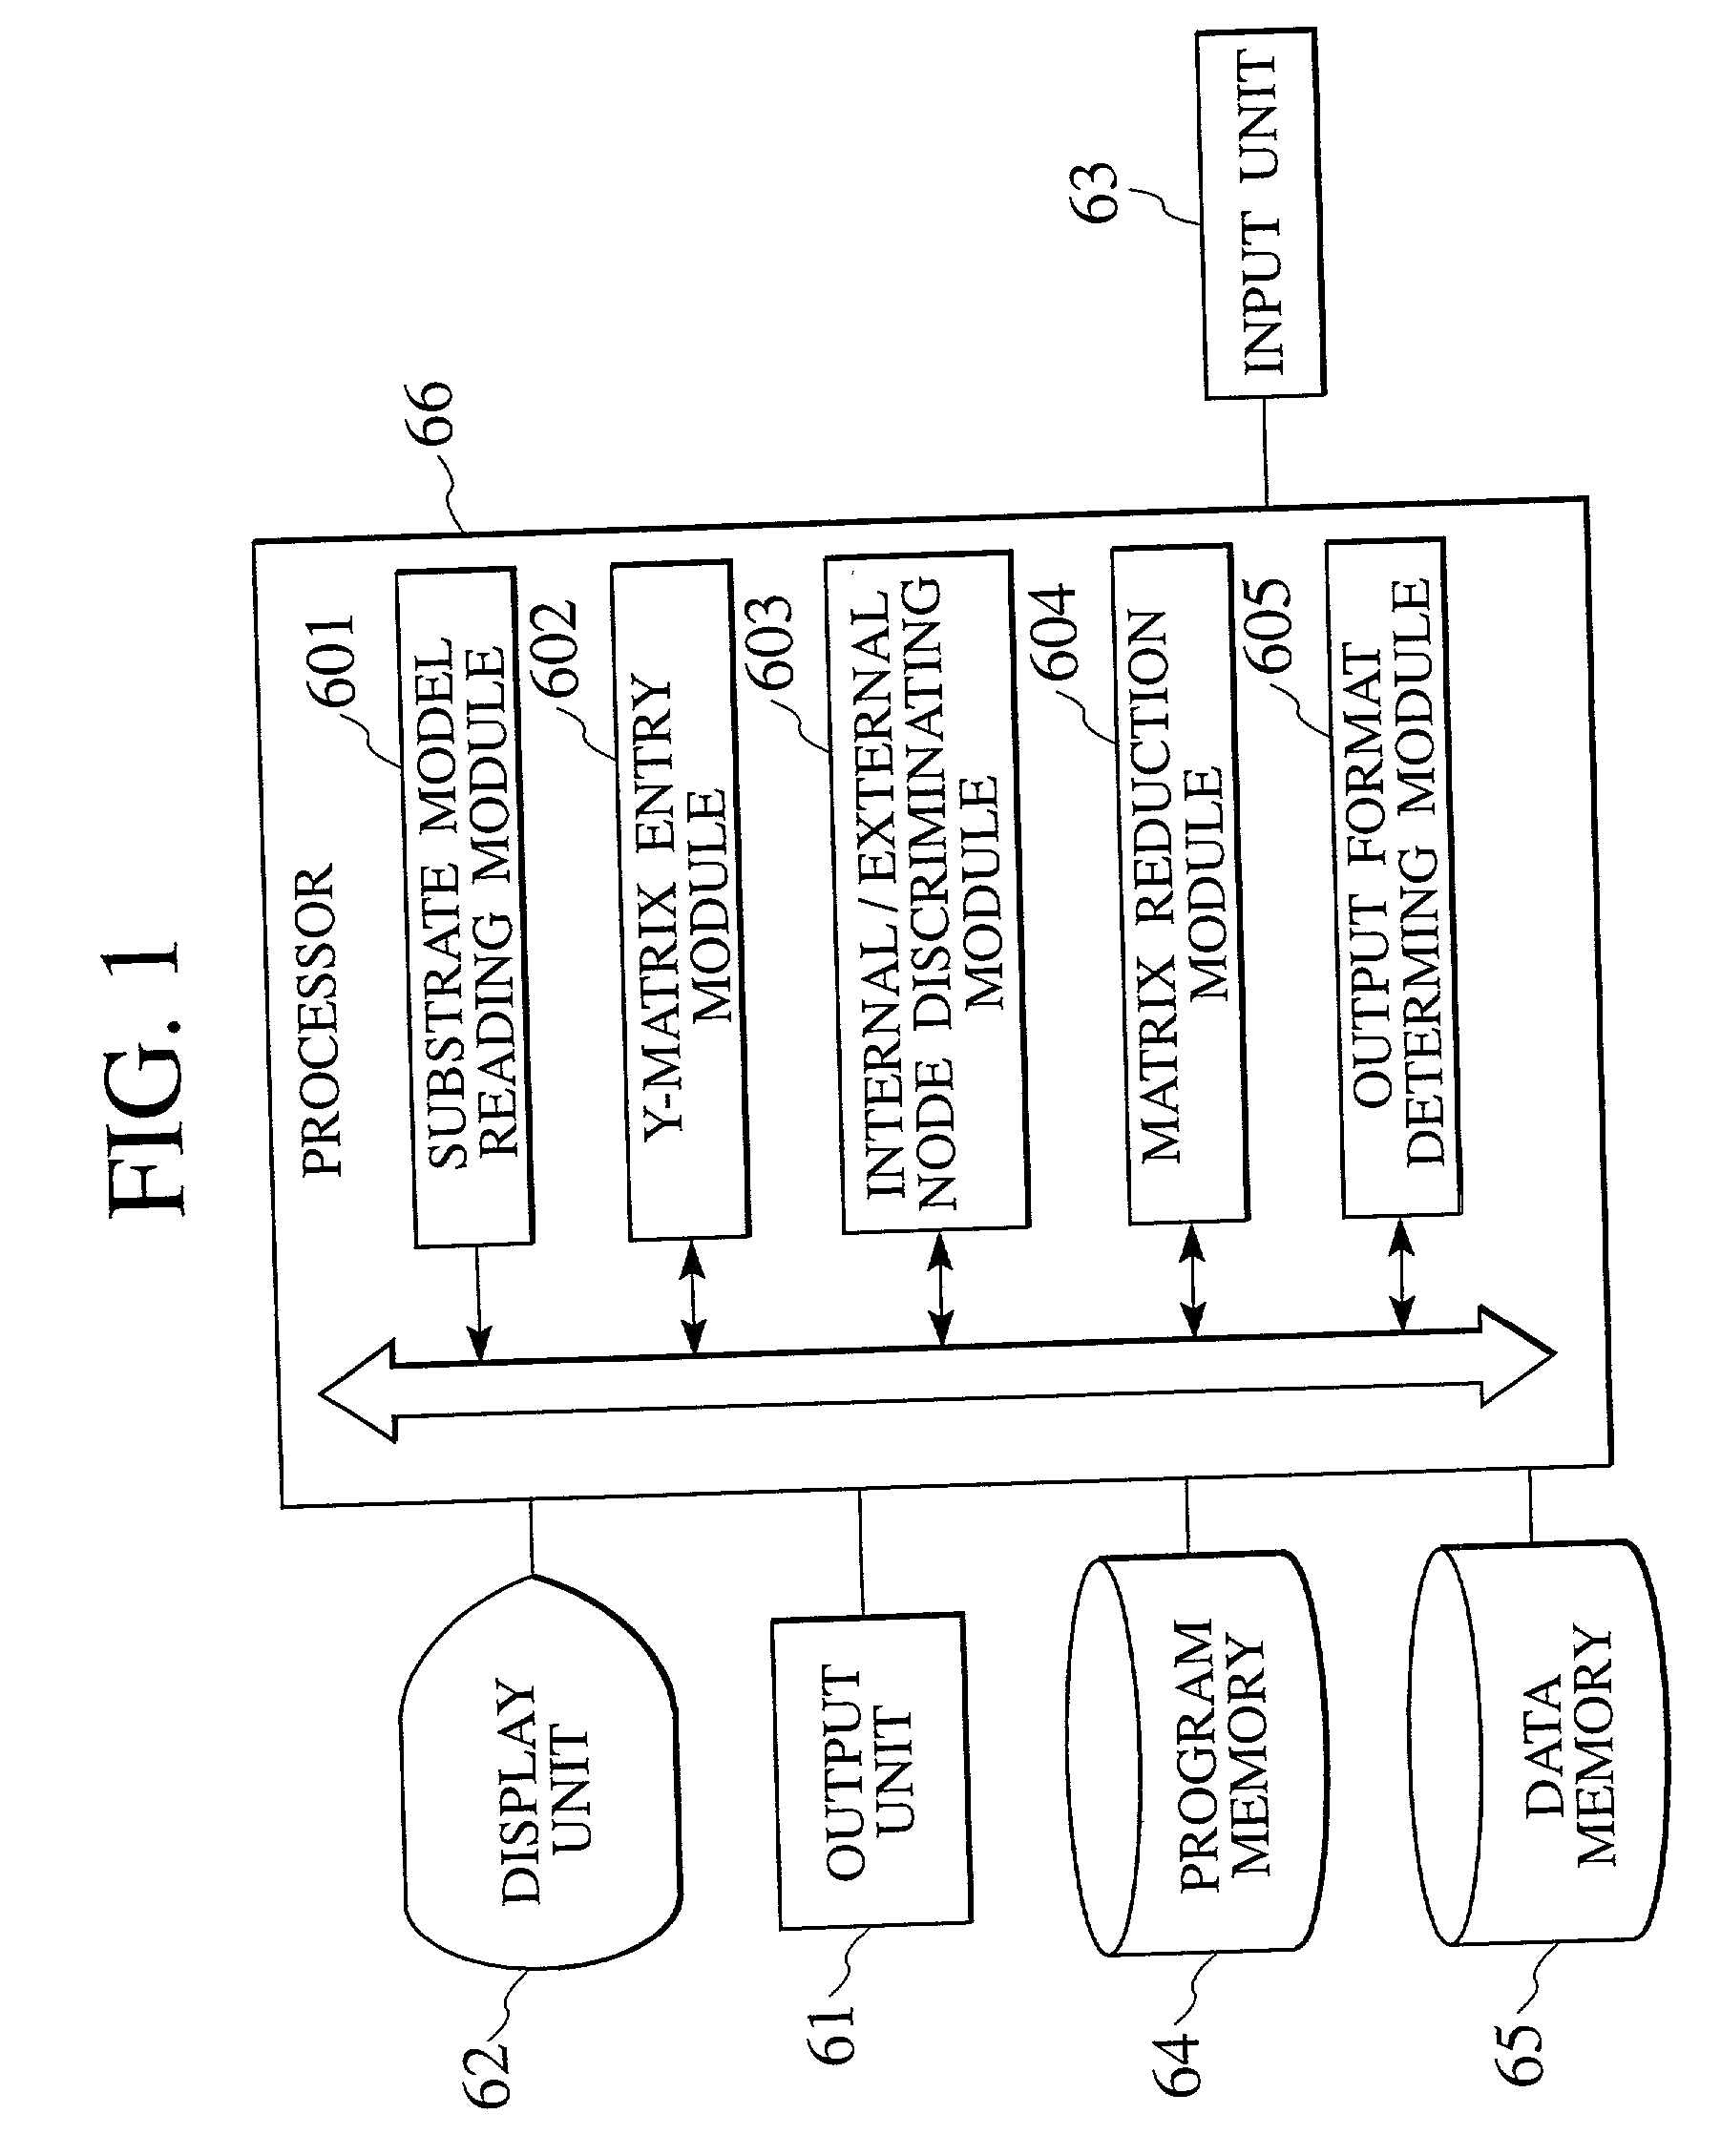 Semiconductor device analyzer, method for analyzing/manufacturing semiconductor device, and storage medium storing program for analyzing semiconductor device